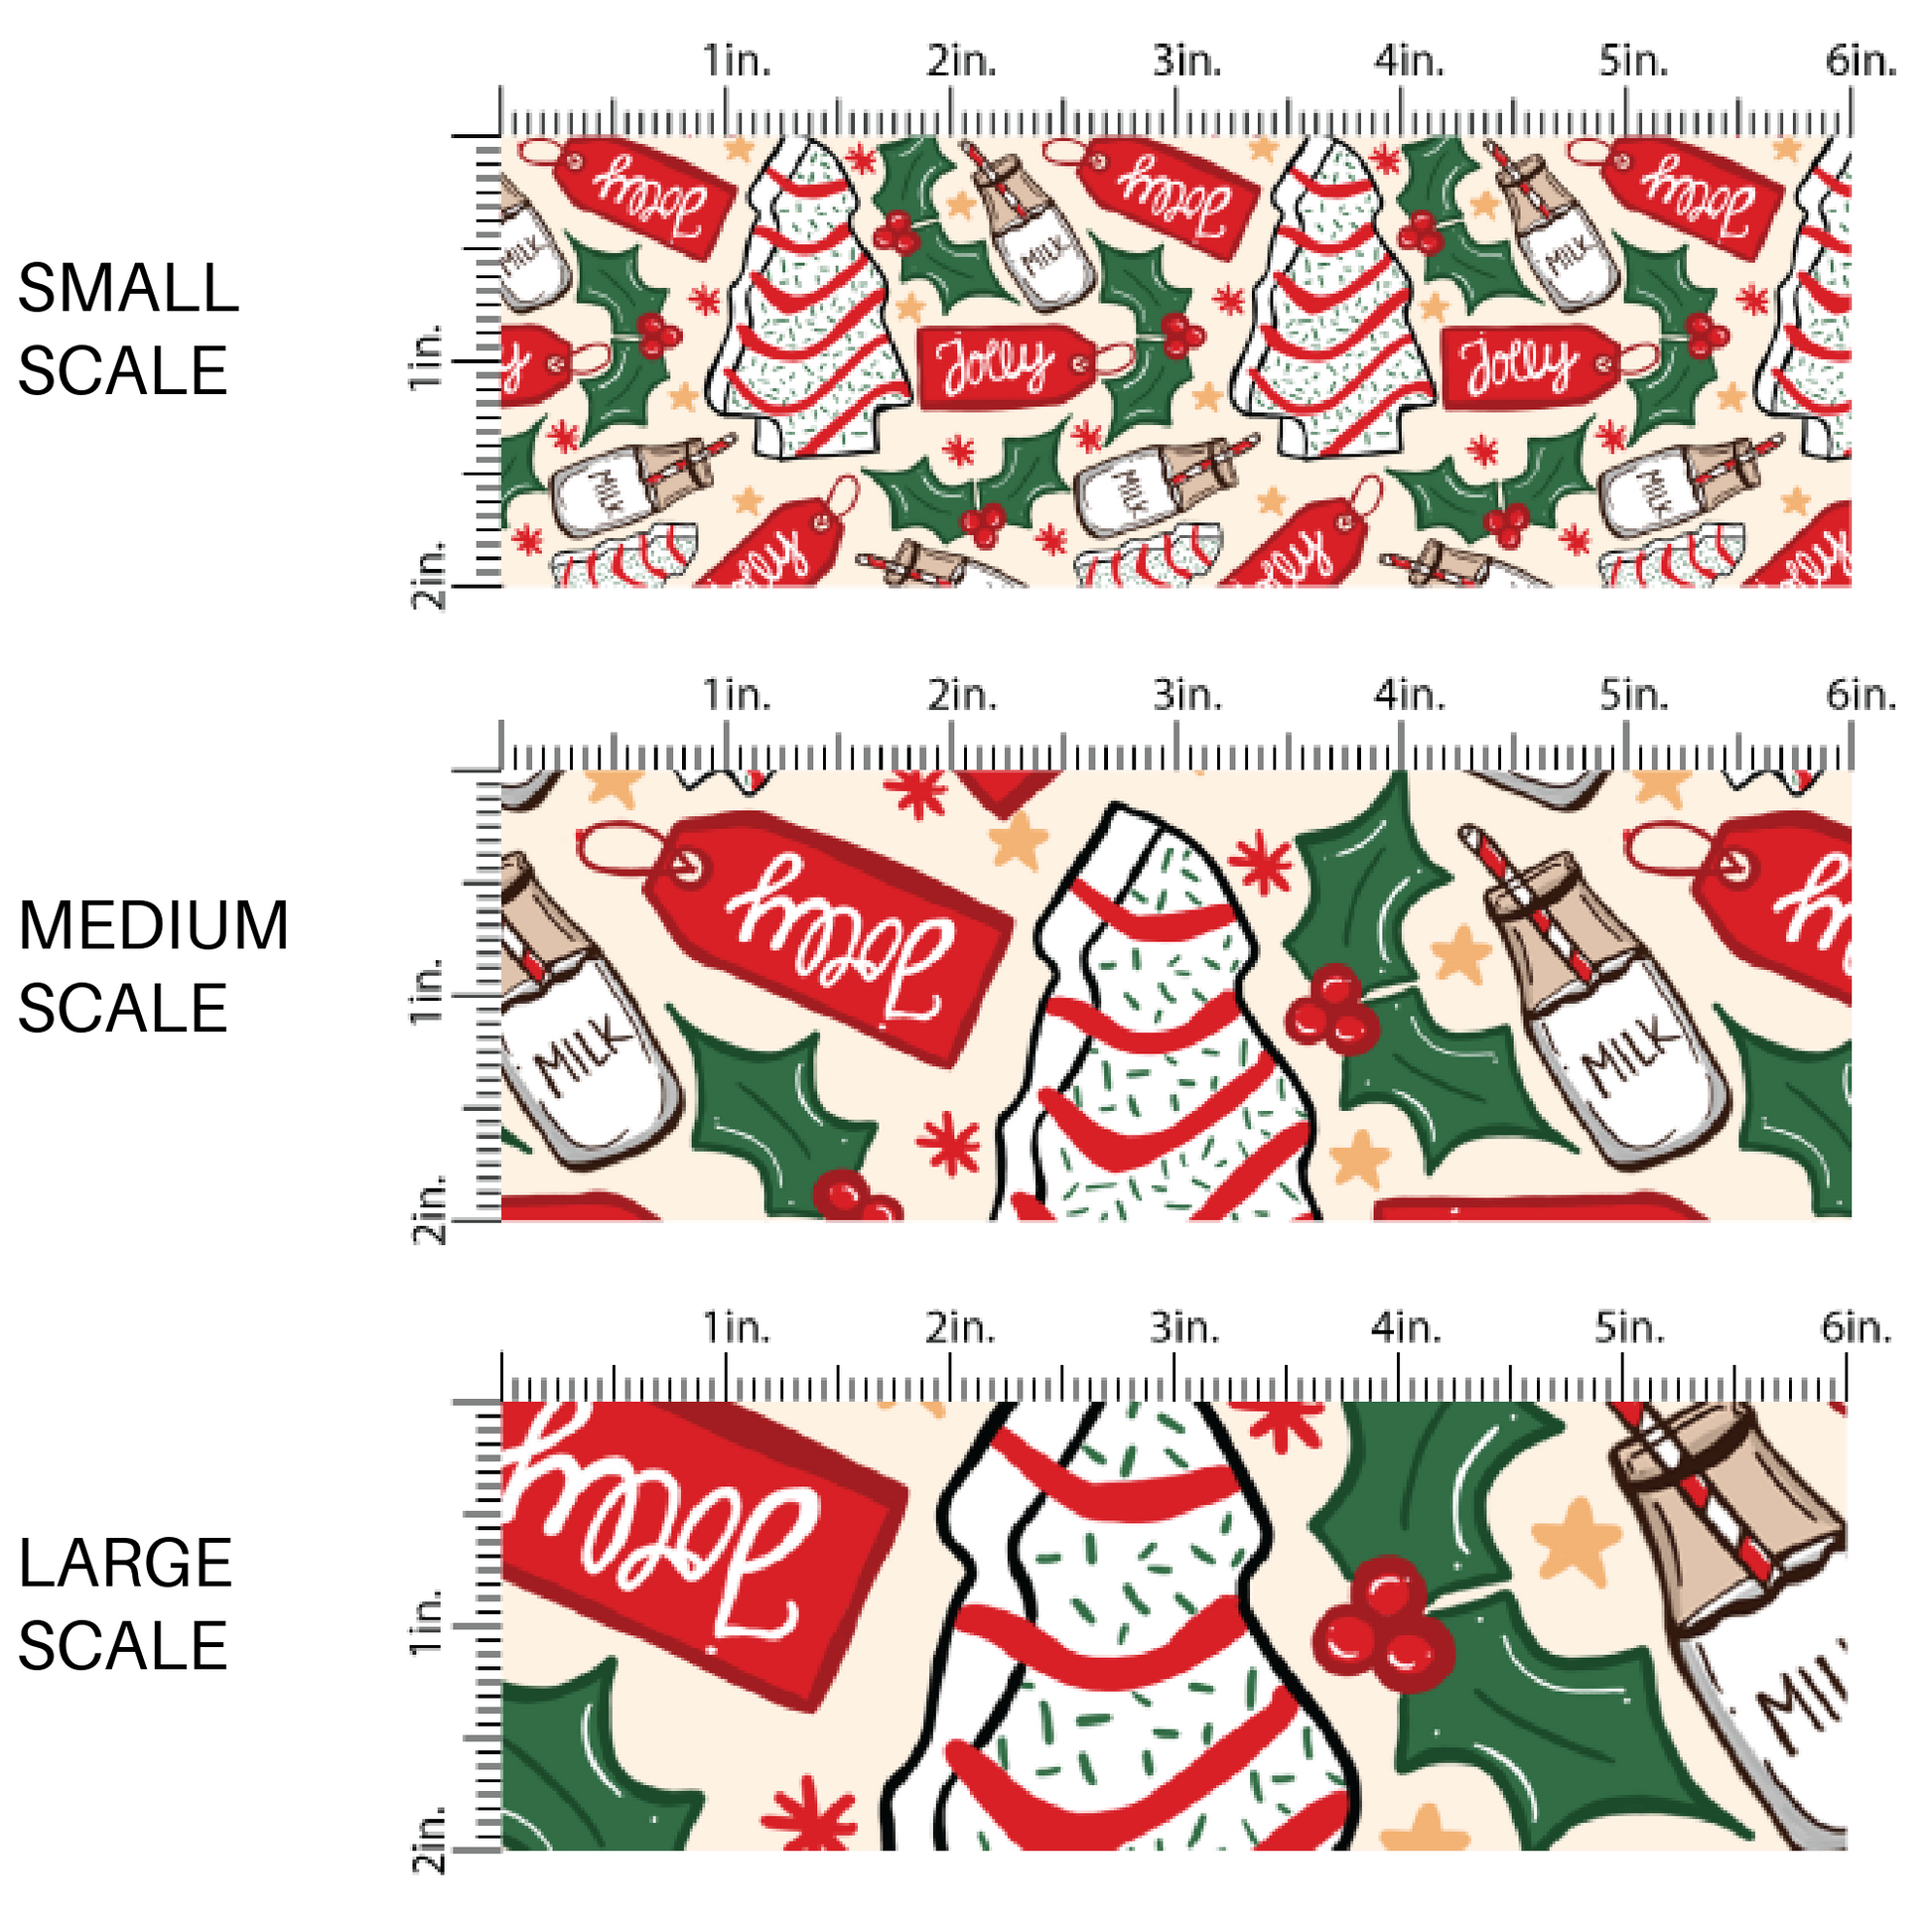 Cream fabric by the yard scaled image guide with Christmas tree cakes, gift tags, holly leaves, and glasses of milk.